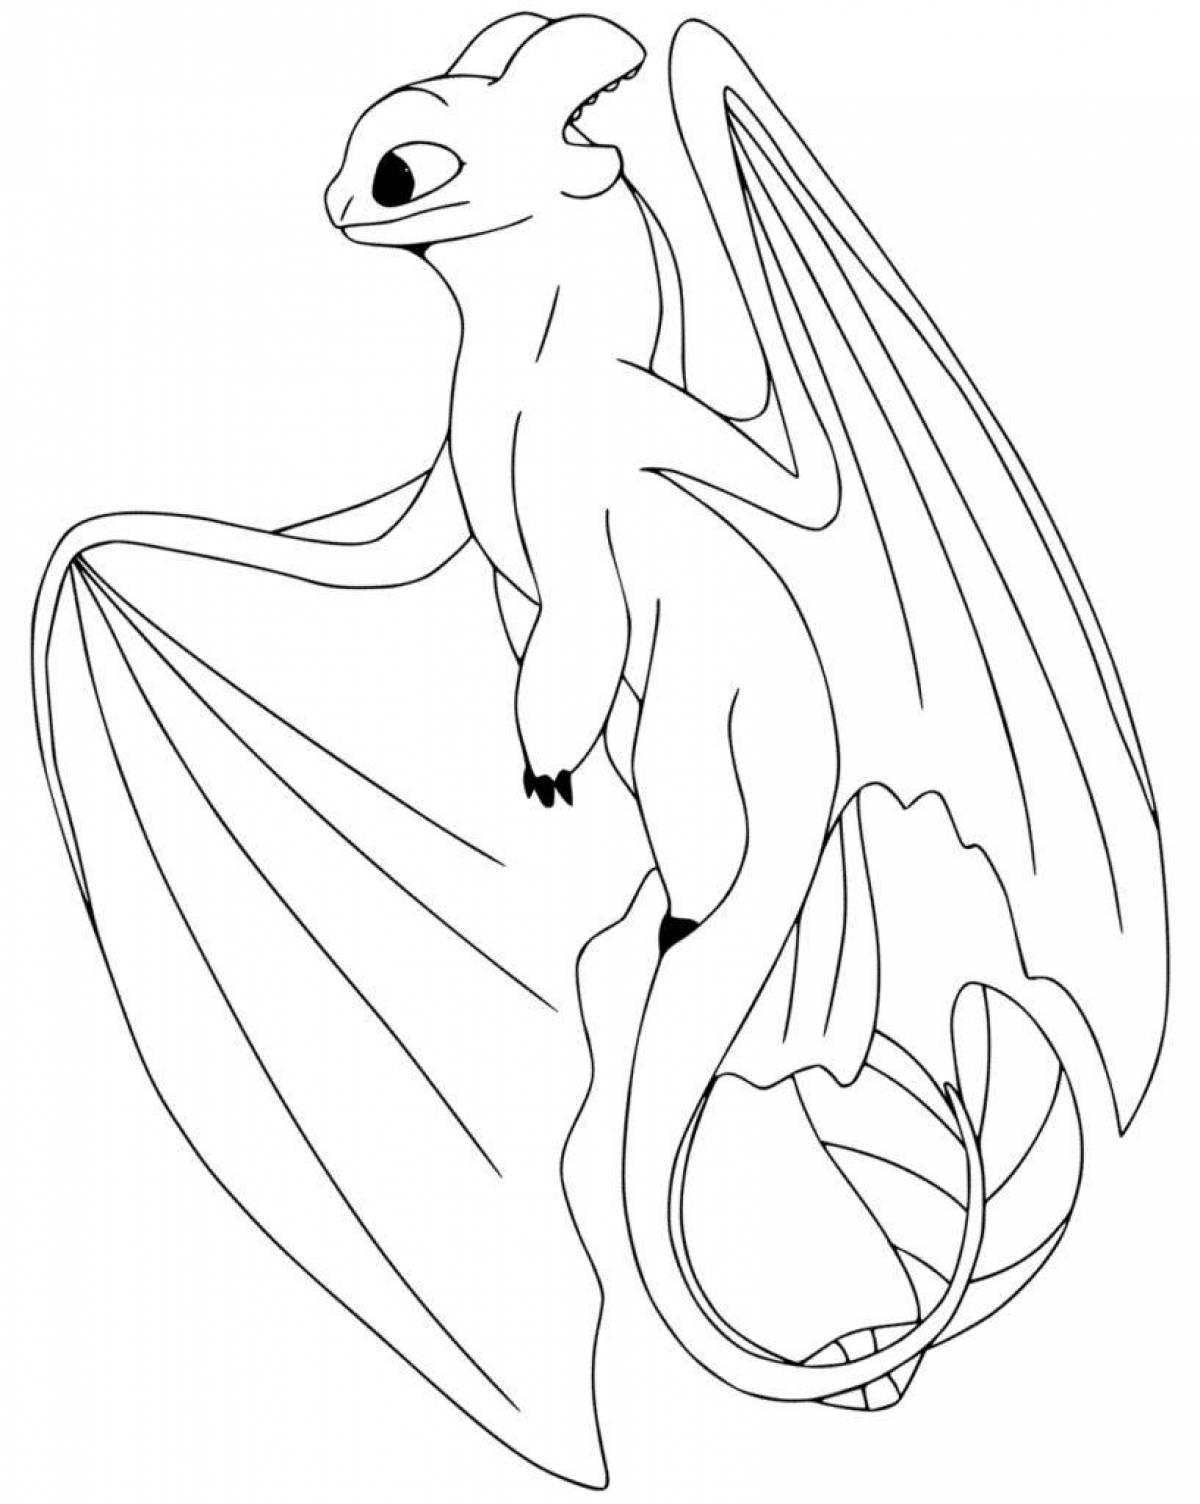 Sublime white fury coloring page